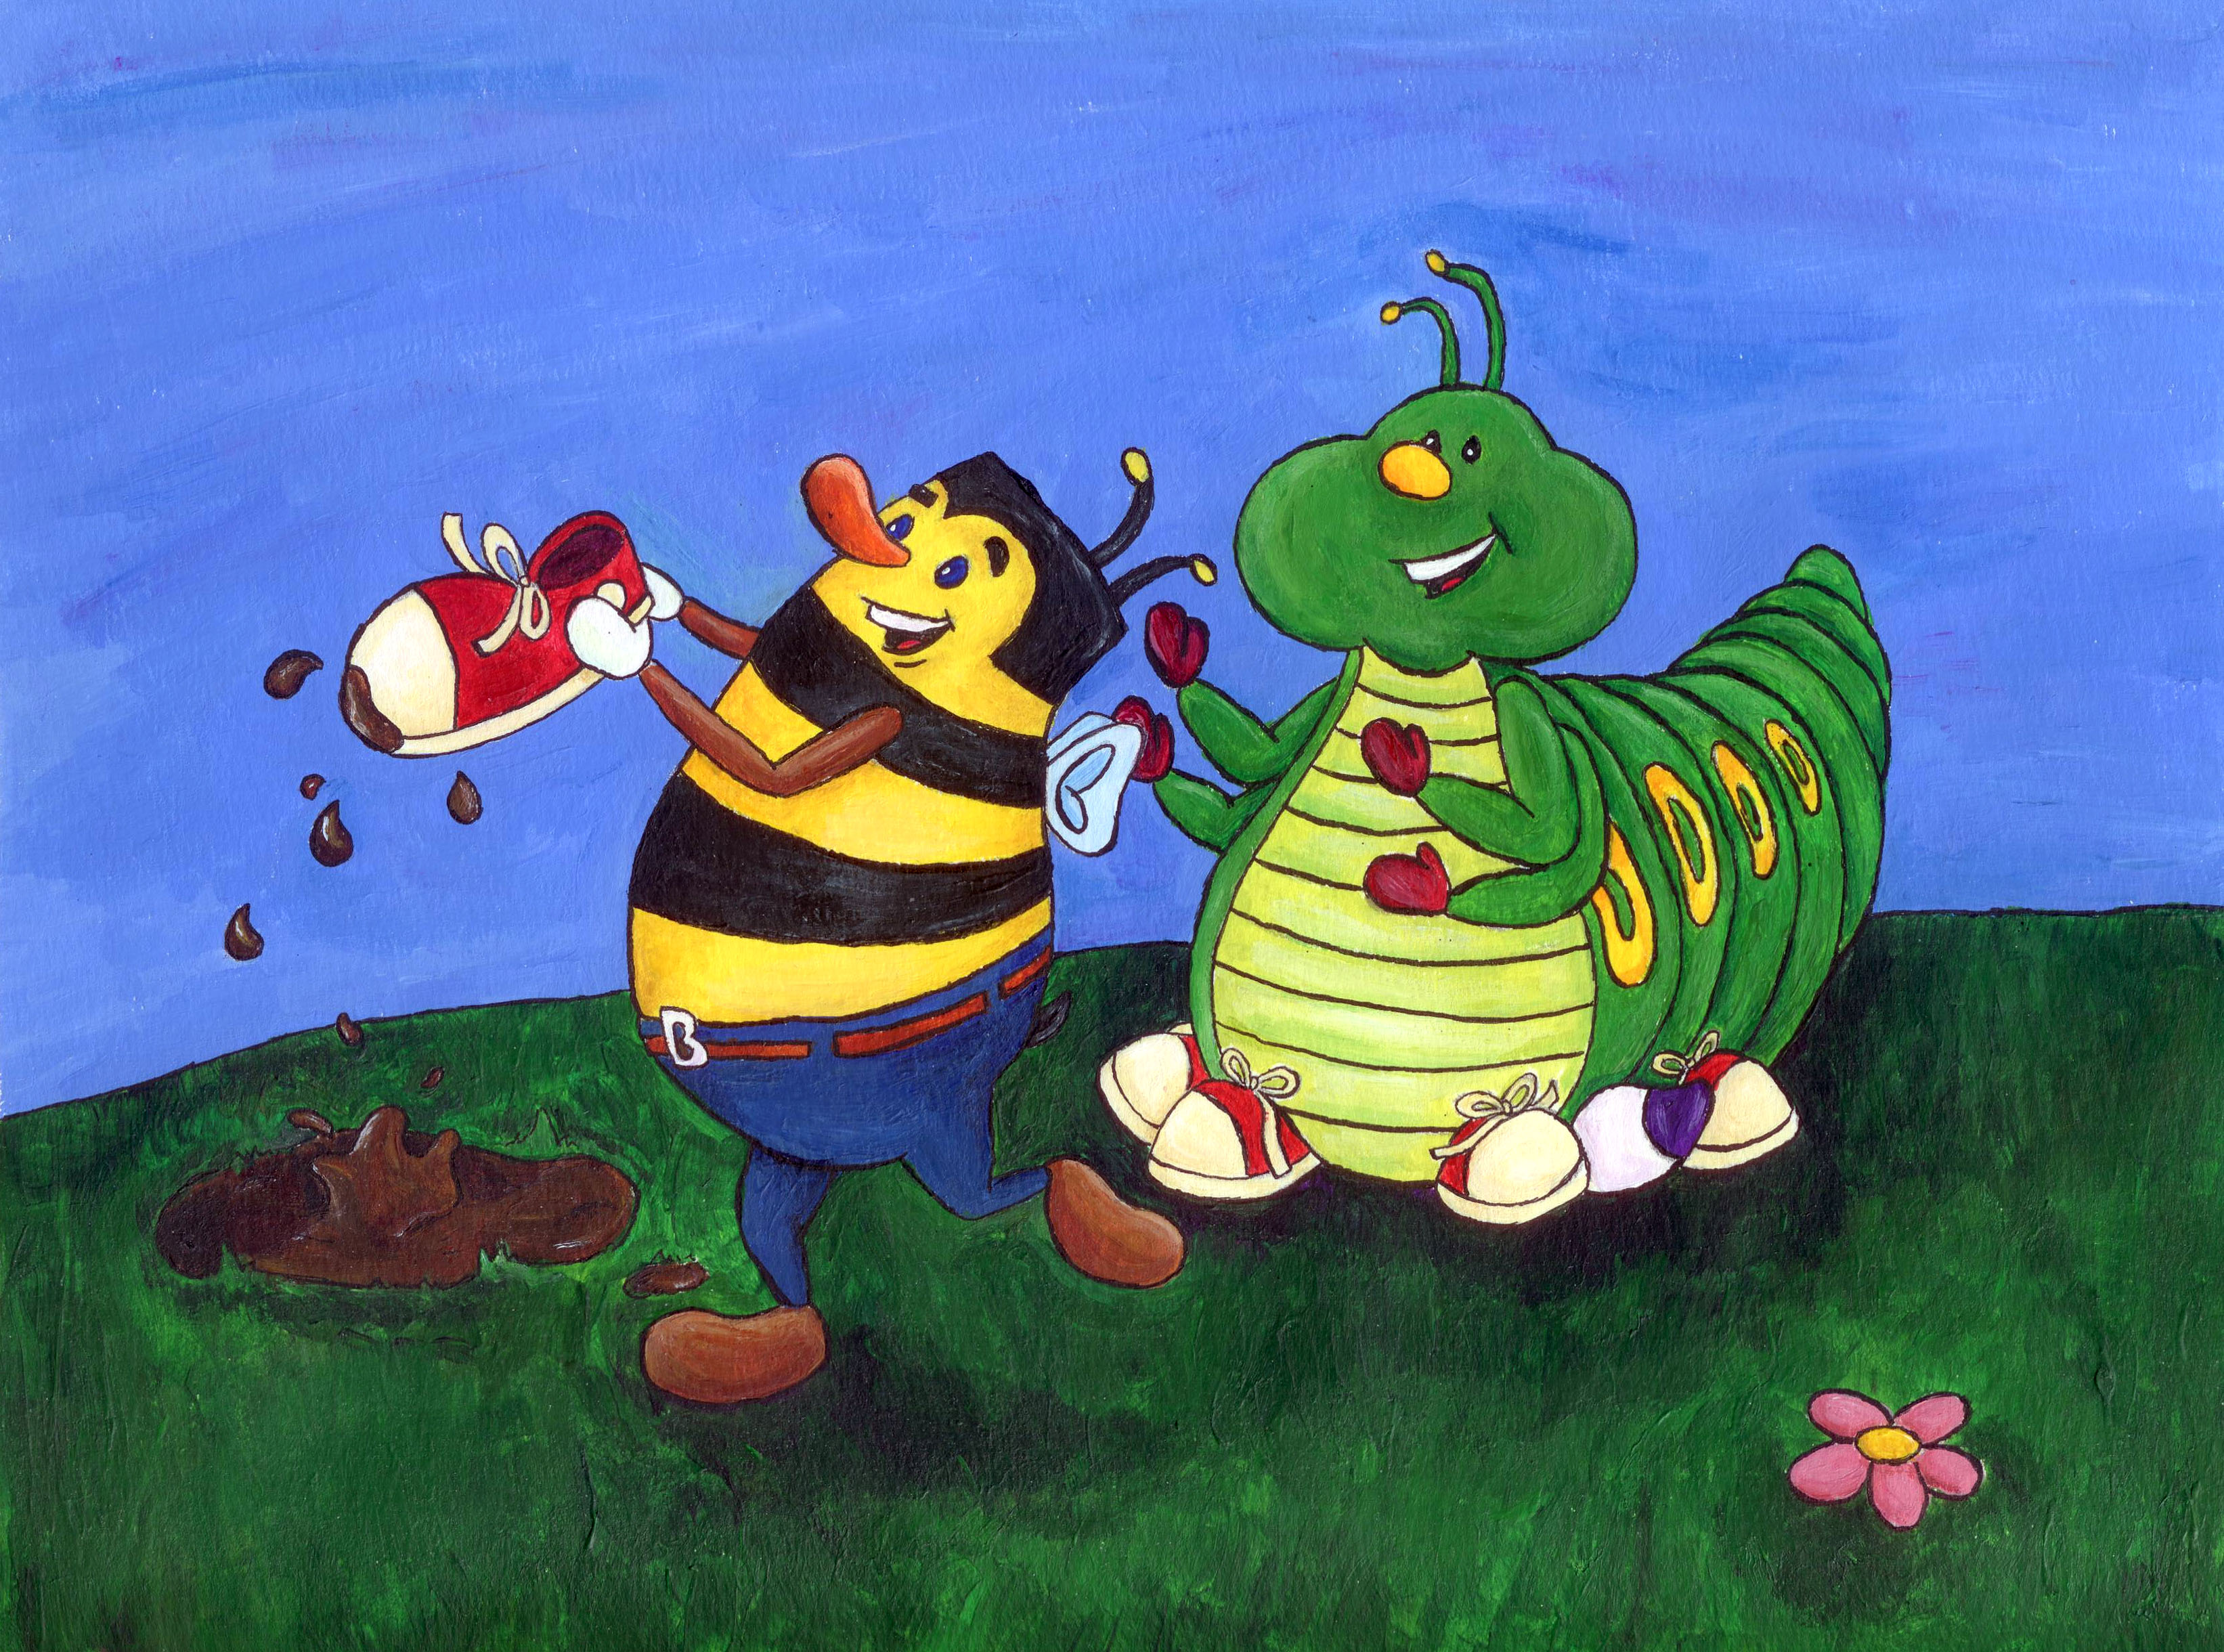 A friendly bee helping a caterpillar with his shoe.